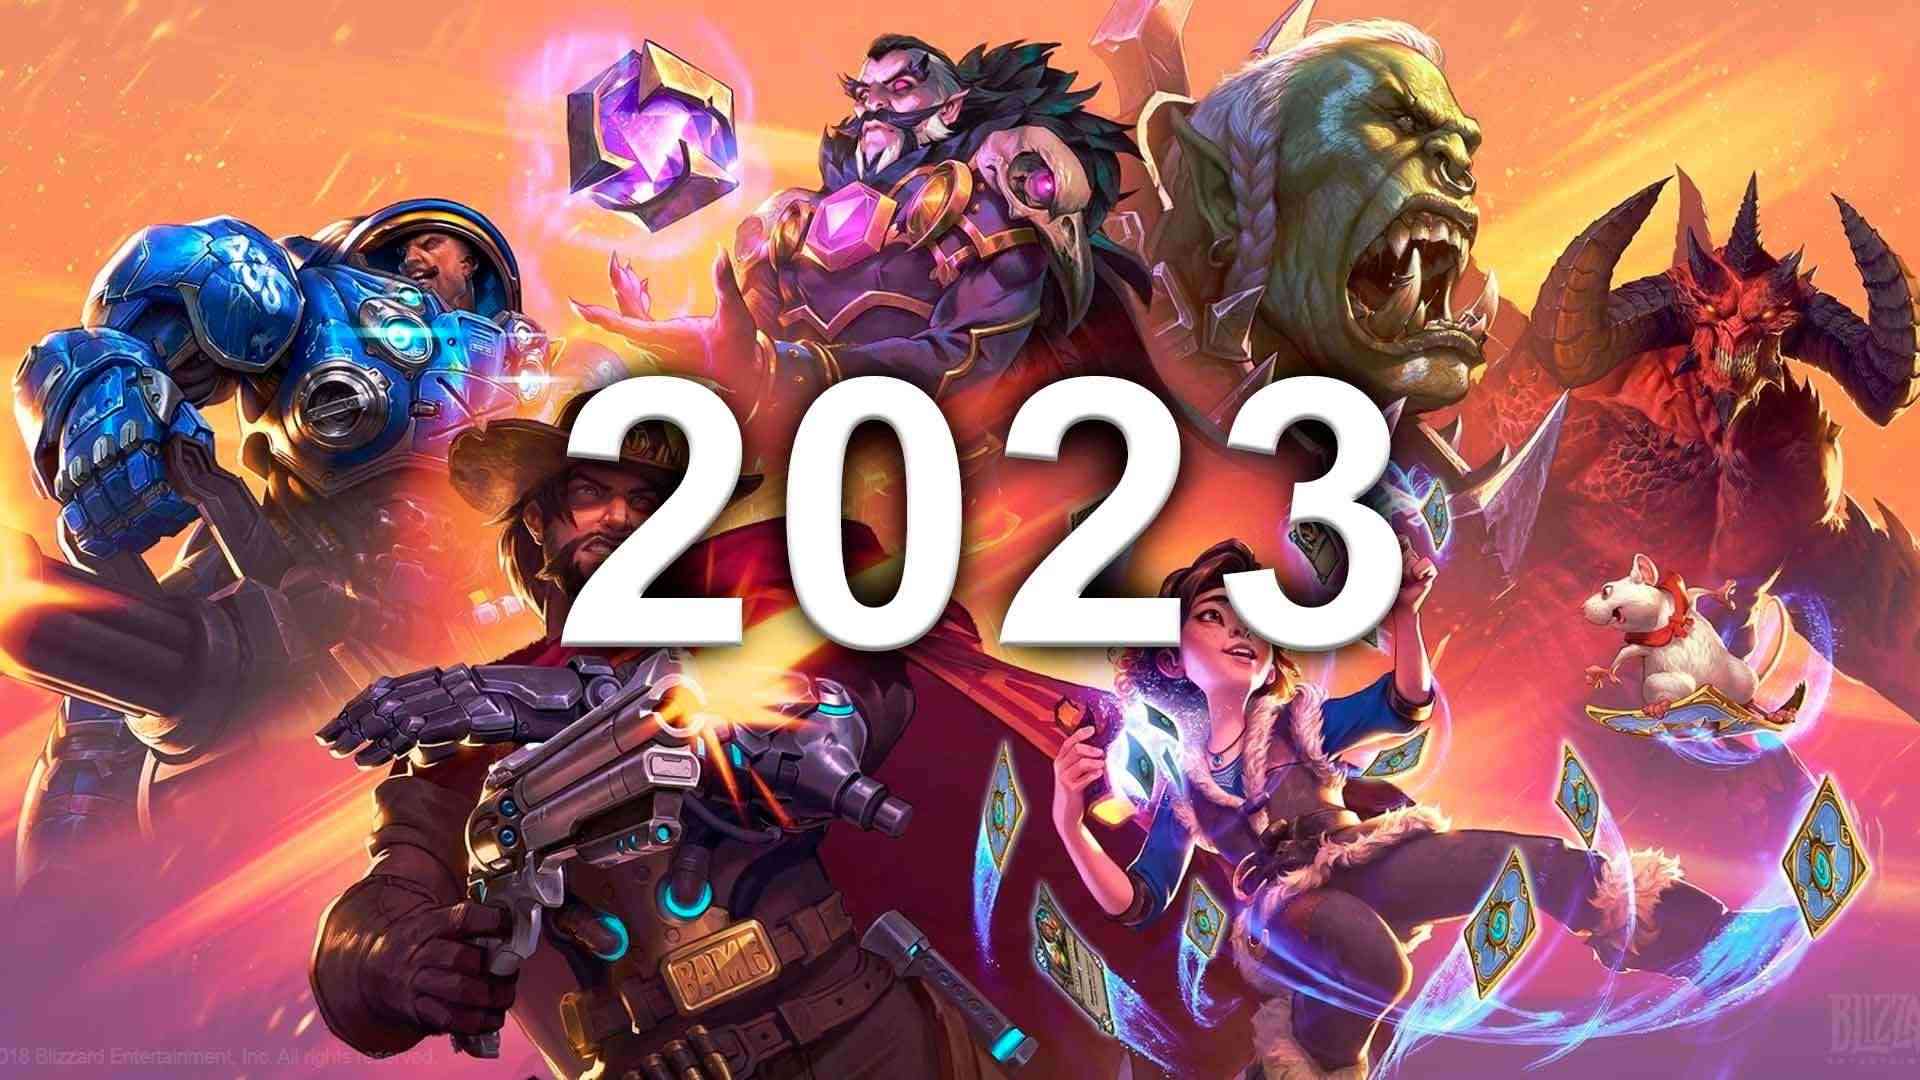 BlizzCon confirmed to return in 2023 after recent events